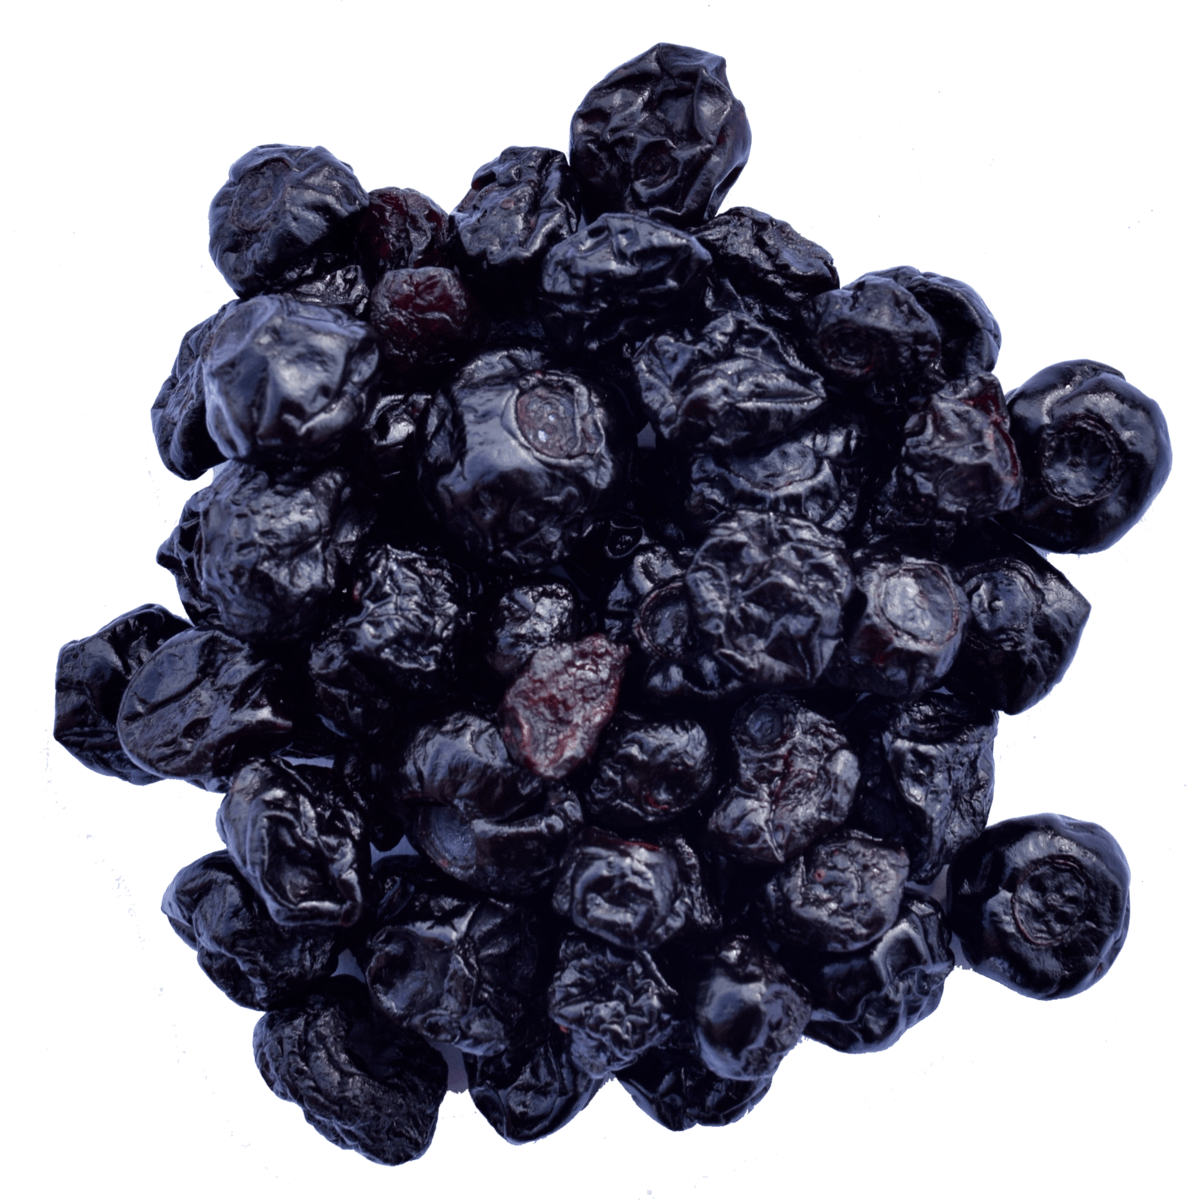 Dried Blueberries - Kate's Kitchen